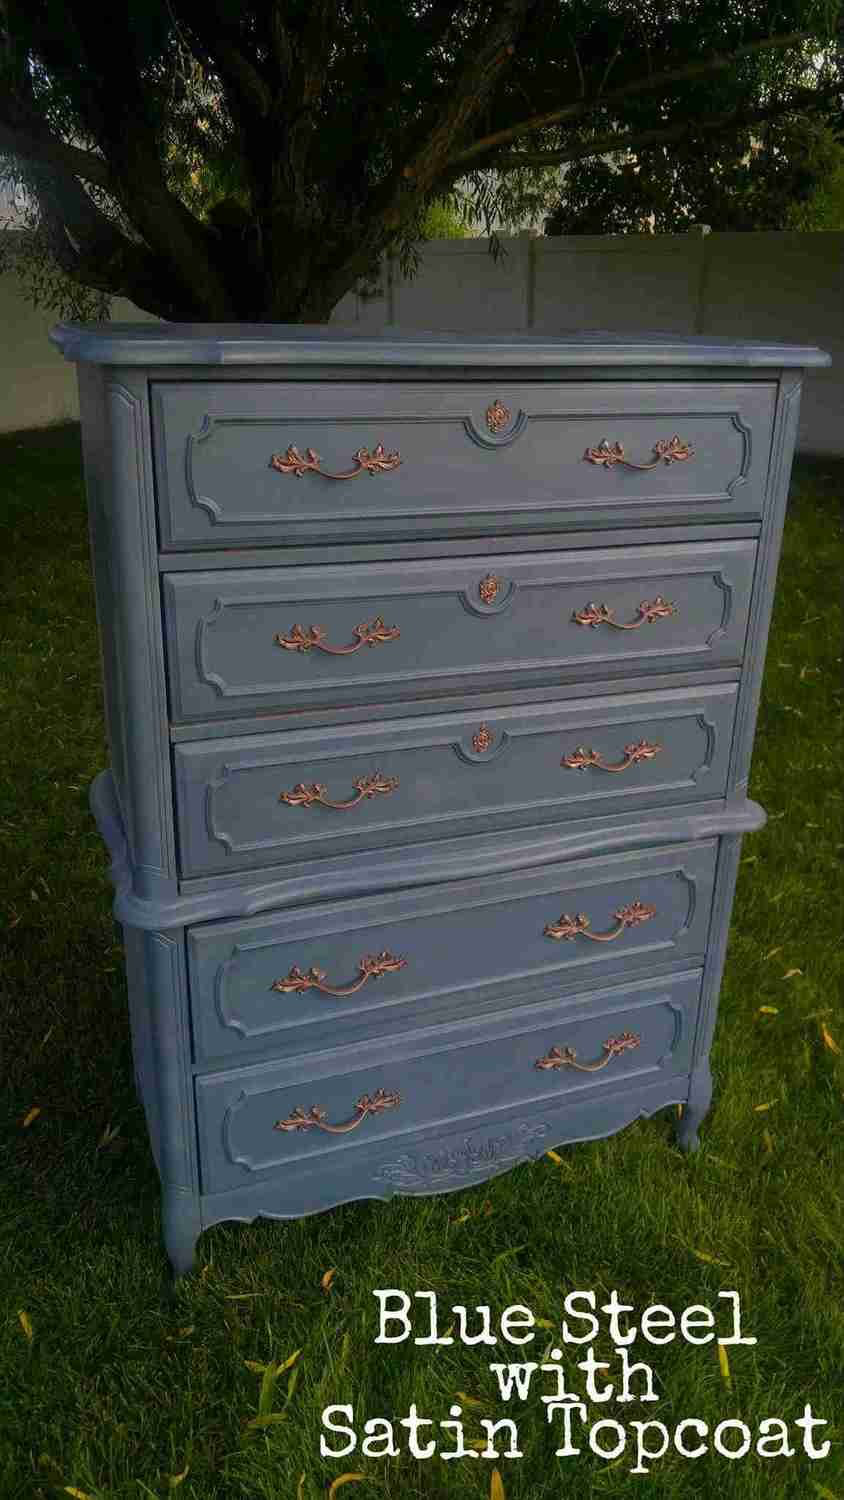 2 Chicks and a Toolbelt Chalky Chicks Furniture Paint Blue Steel